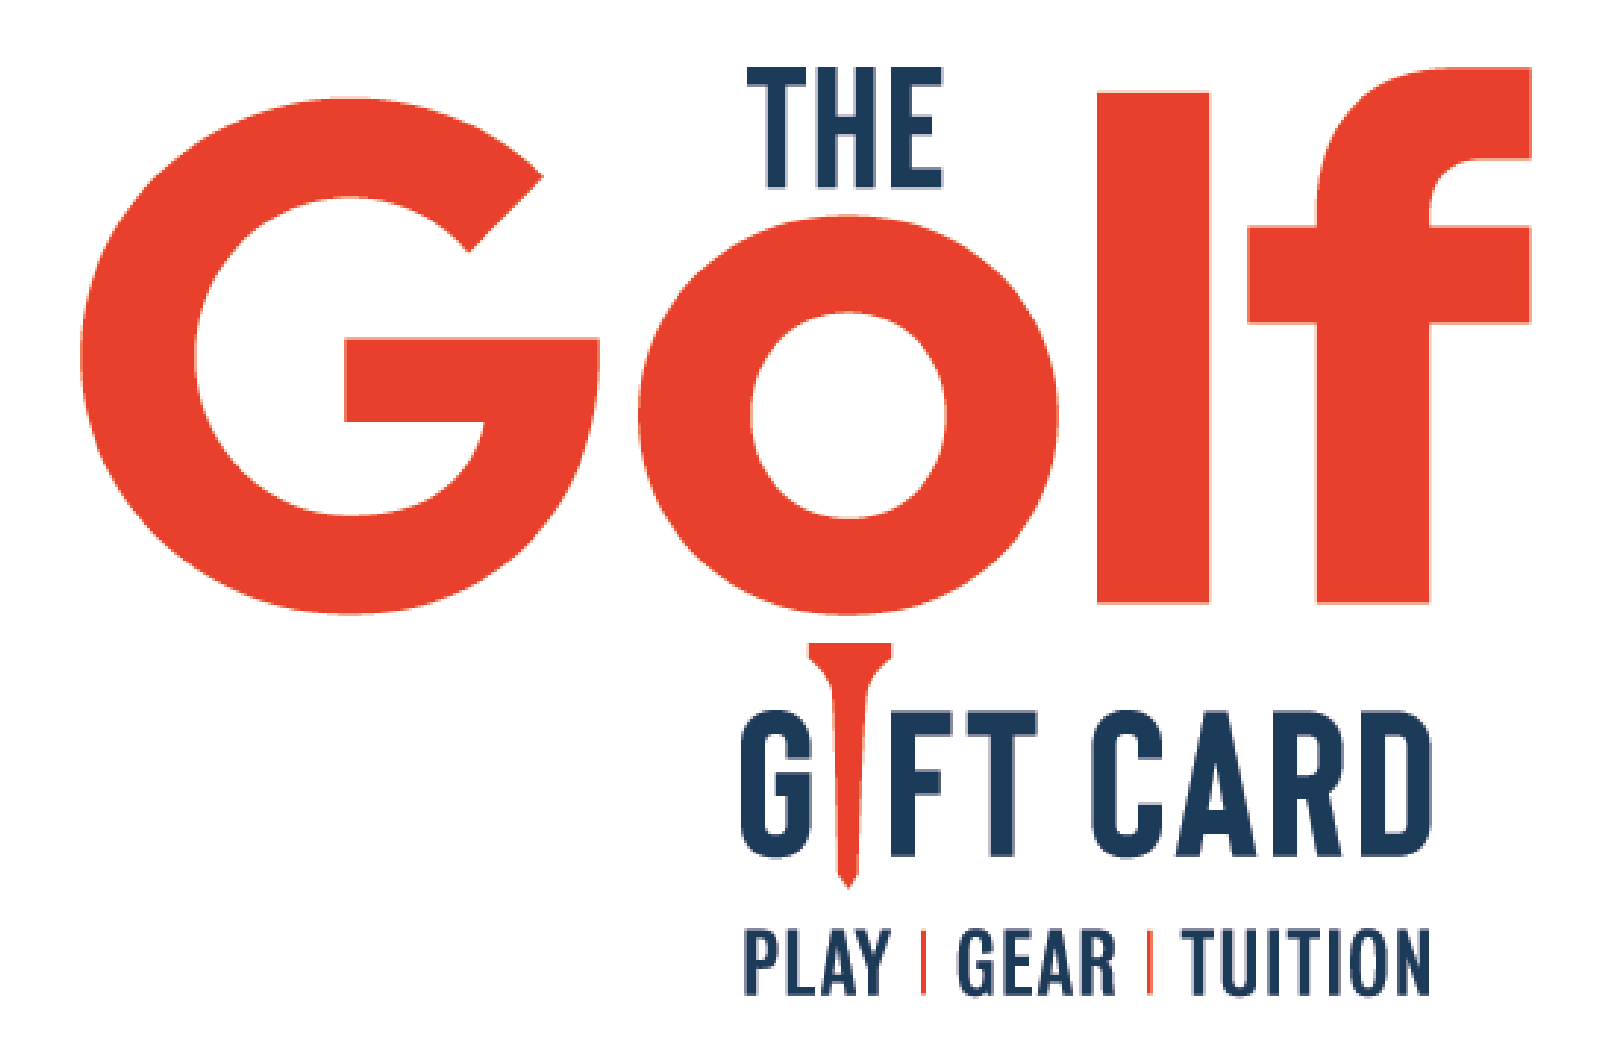 Enhance your golfing talents with education gift cards.